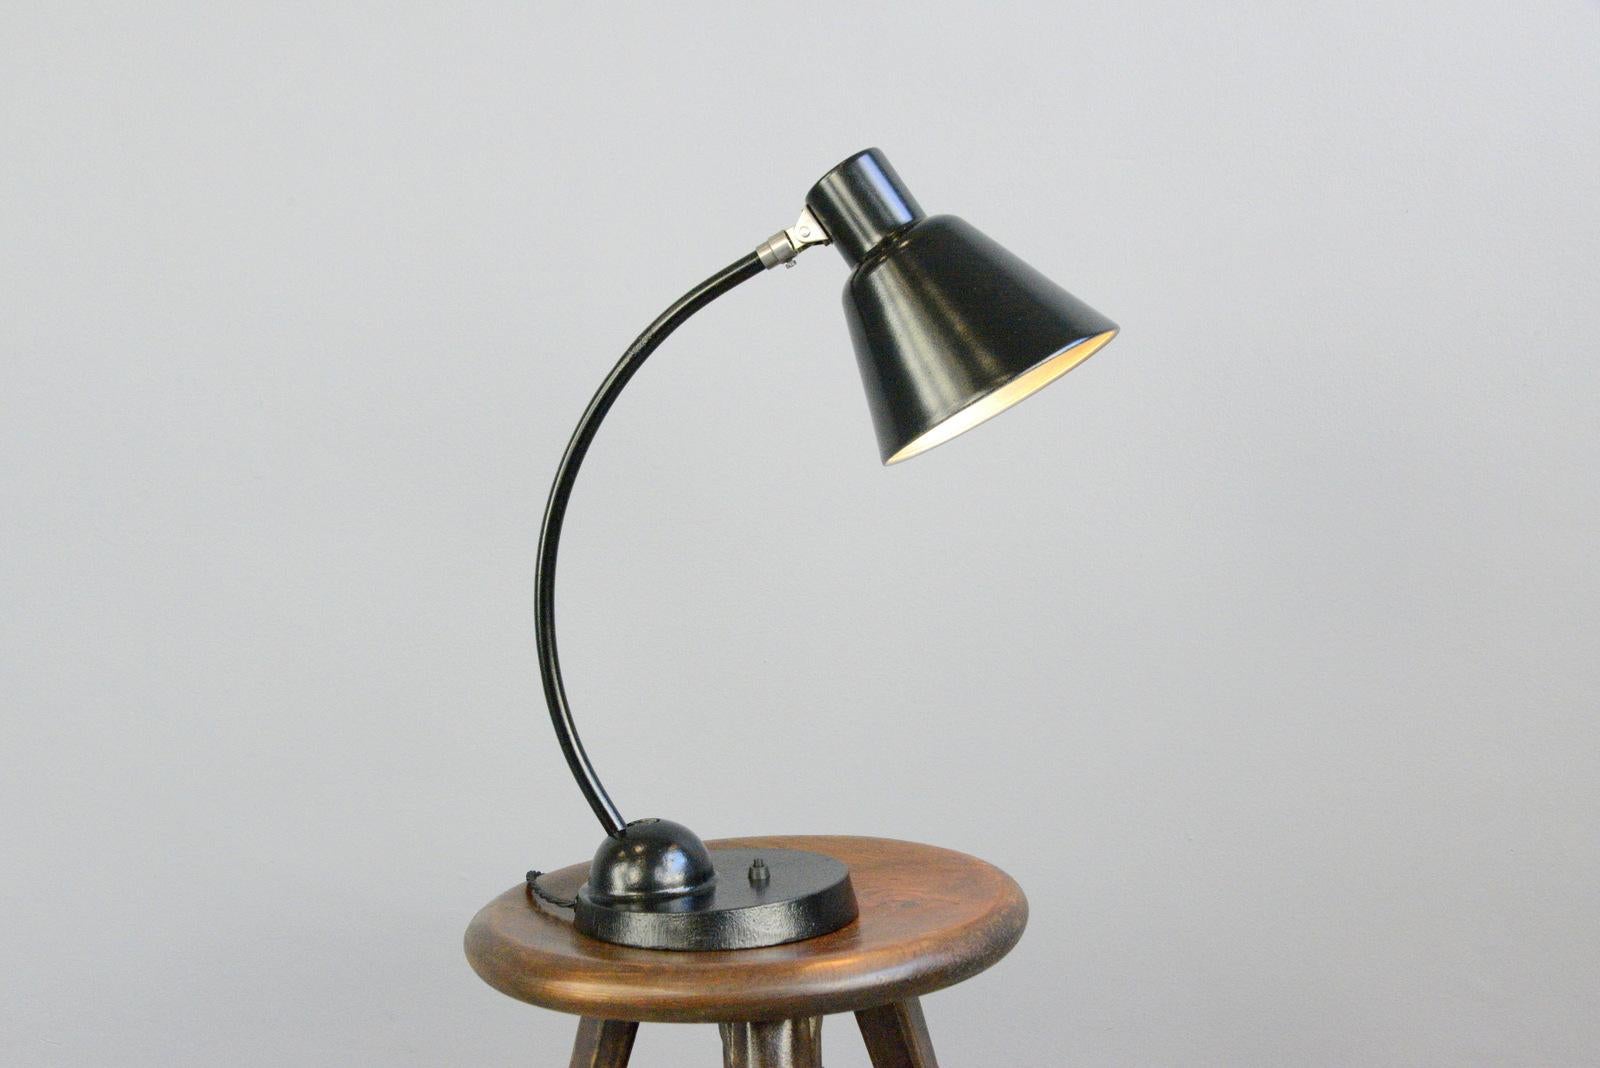 Bauhaus table lamp by Schaco, circa 1930s

- Cast iron base
- Adjustable curved arm
- Adjustable steel shade
- On/Off toggle switch on the base
- Relief 